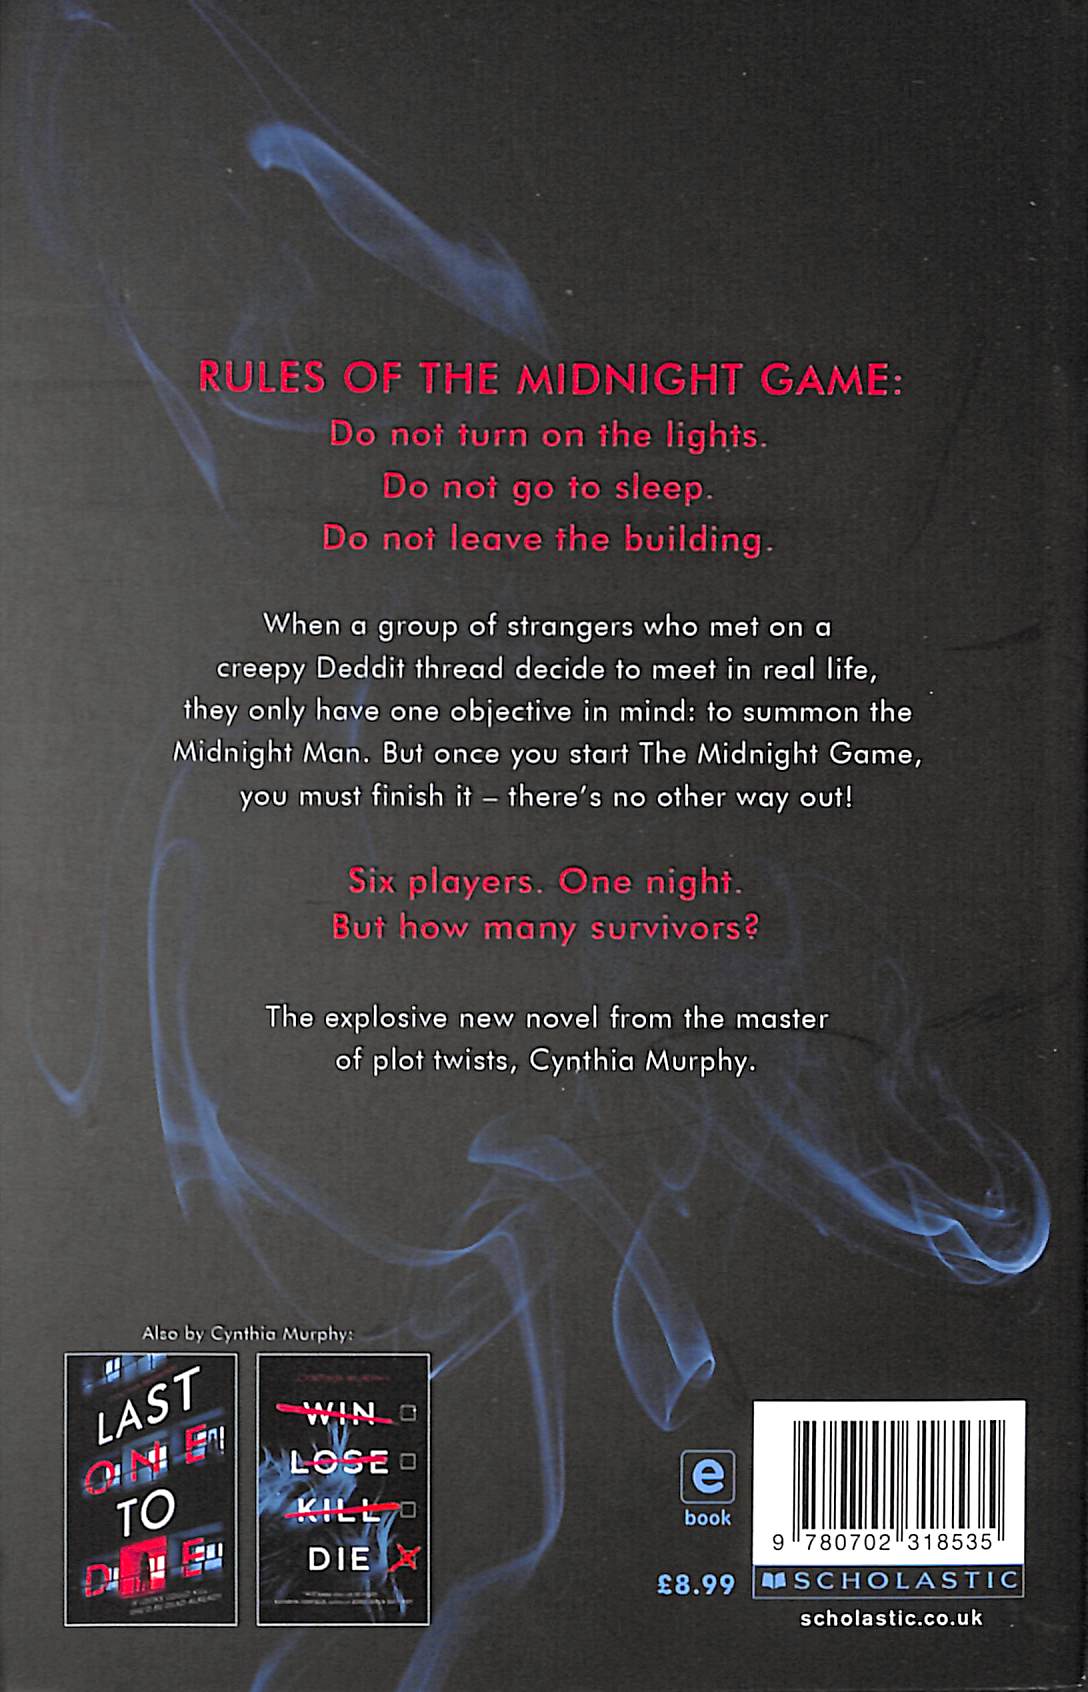 The Midnight Game by Cynthia Murphy